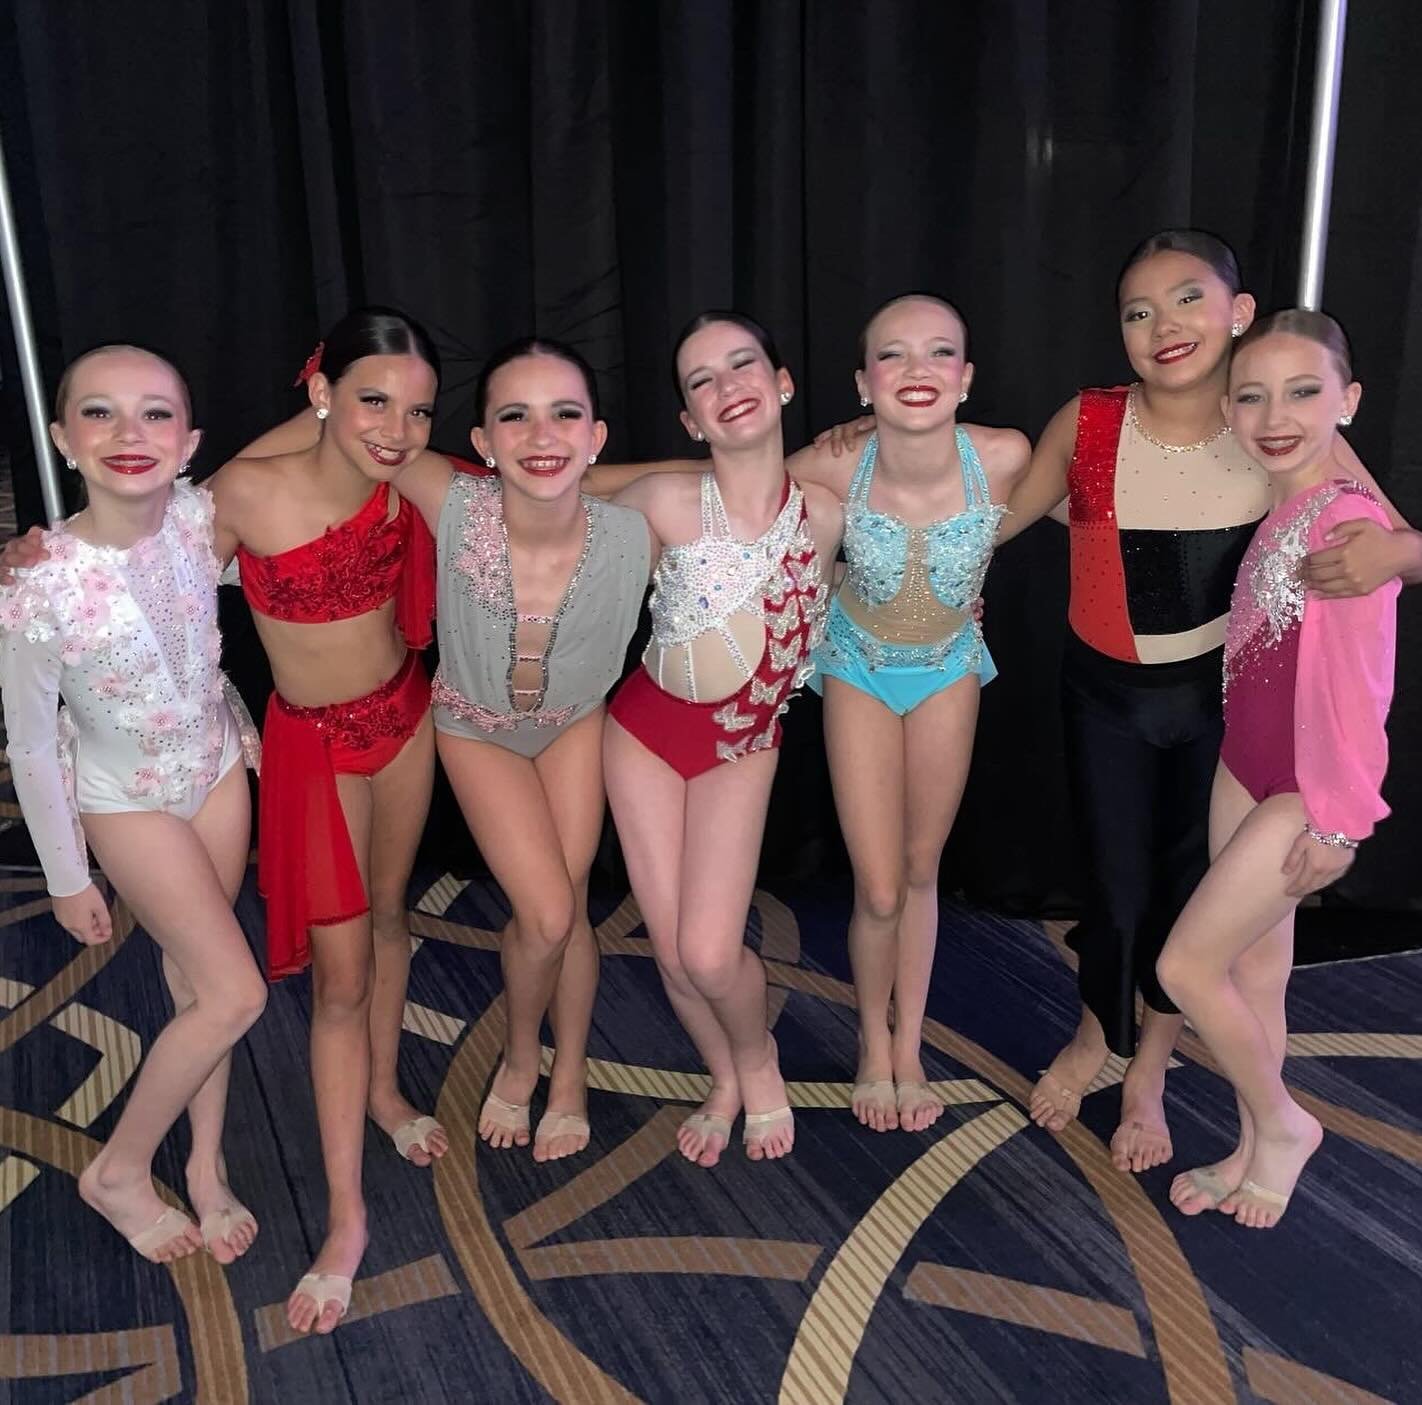 Our Junior soloists ROCKED the Fly stage last night&hellip; who&rsquo;s ready for DAY 2?💎 @flydancecompetition 

#season13 #diamonddancers #dancetechnique #lyricaldance #contemporarydance #dancetechnique#homeofthebest #competitiondance #compseason #